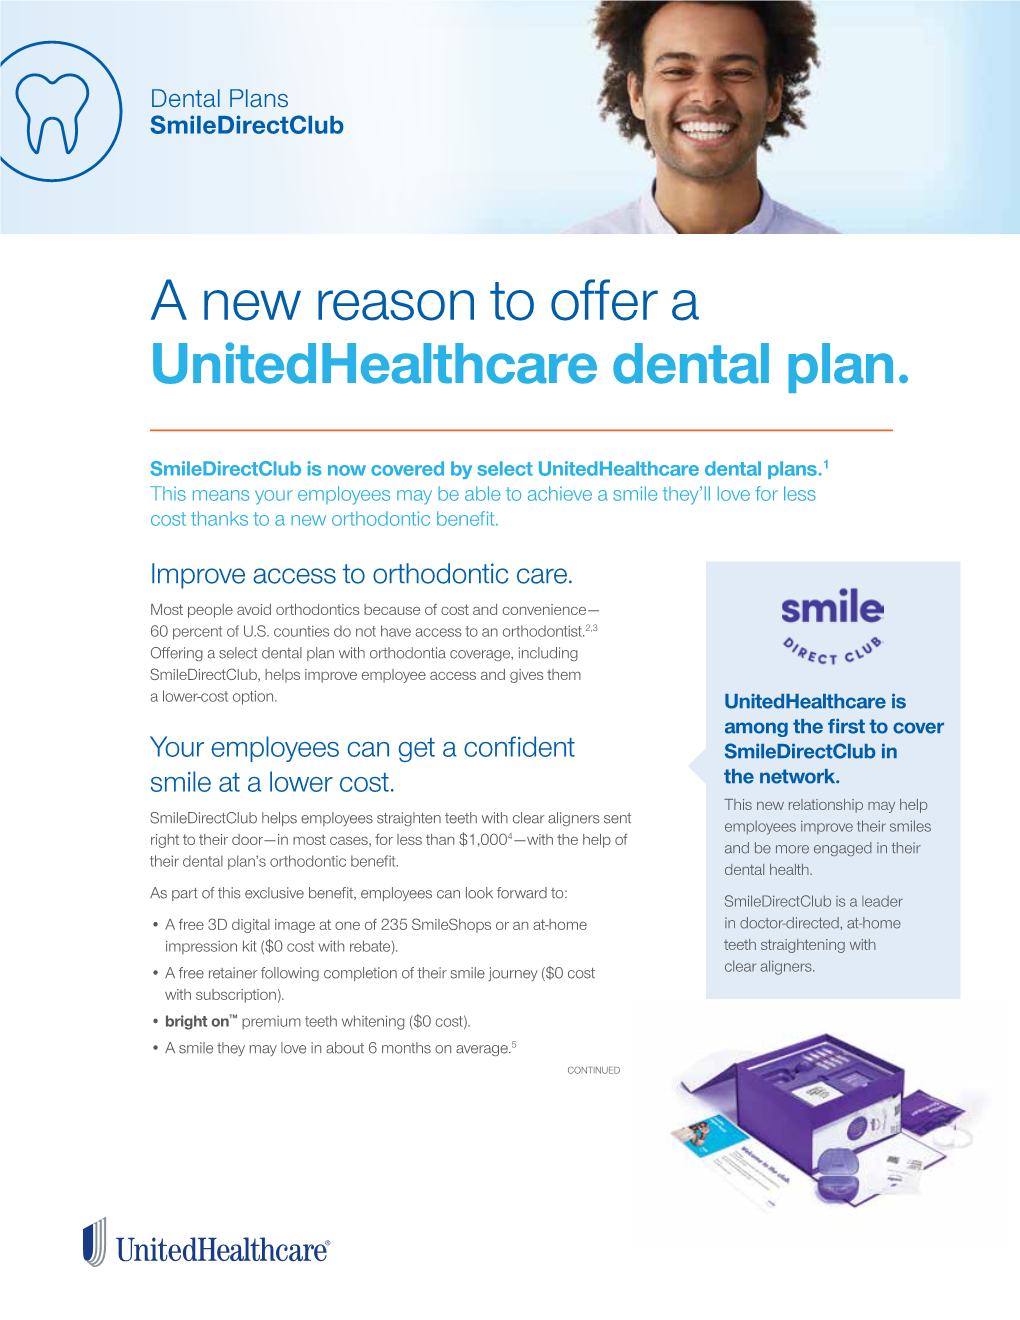 A New Reason to Offer a Unitedhealthcare Dental Plan